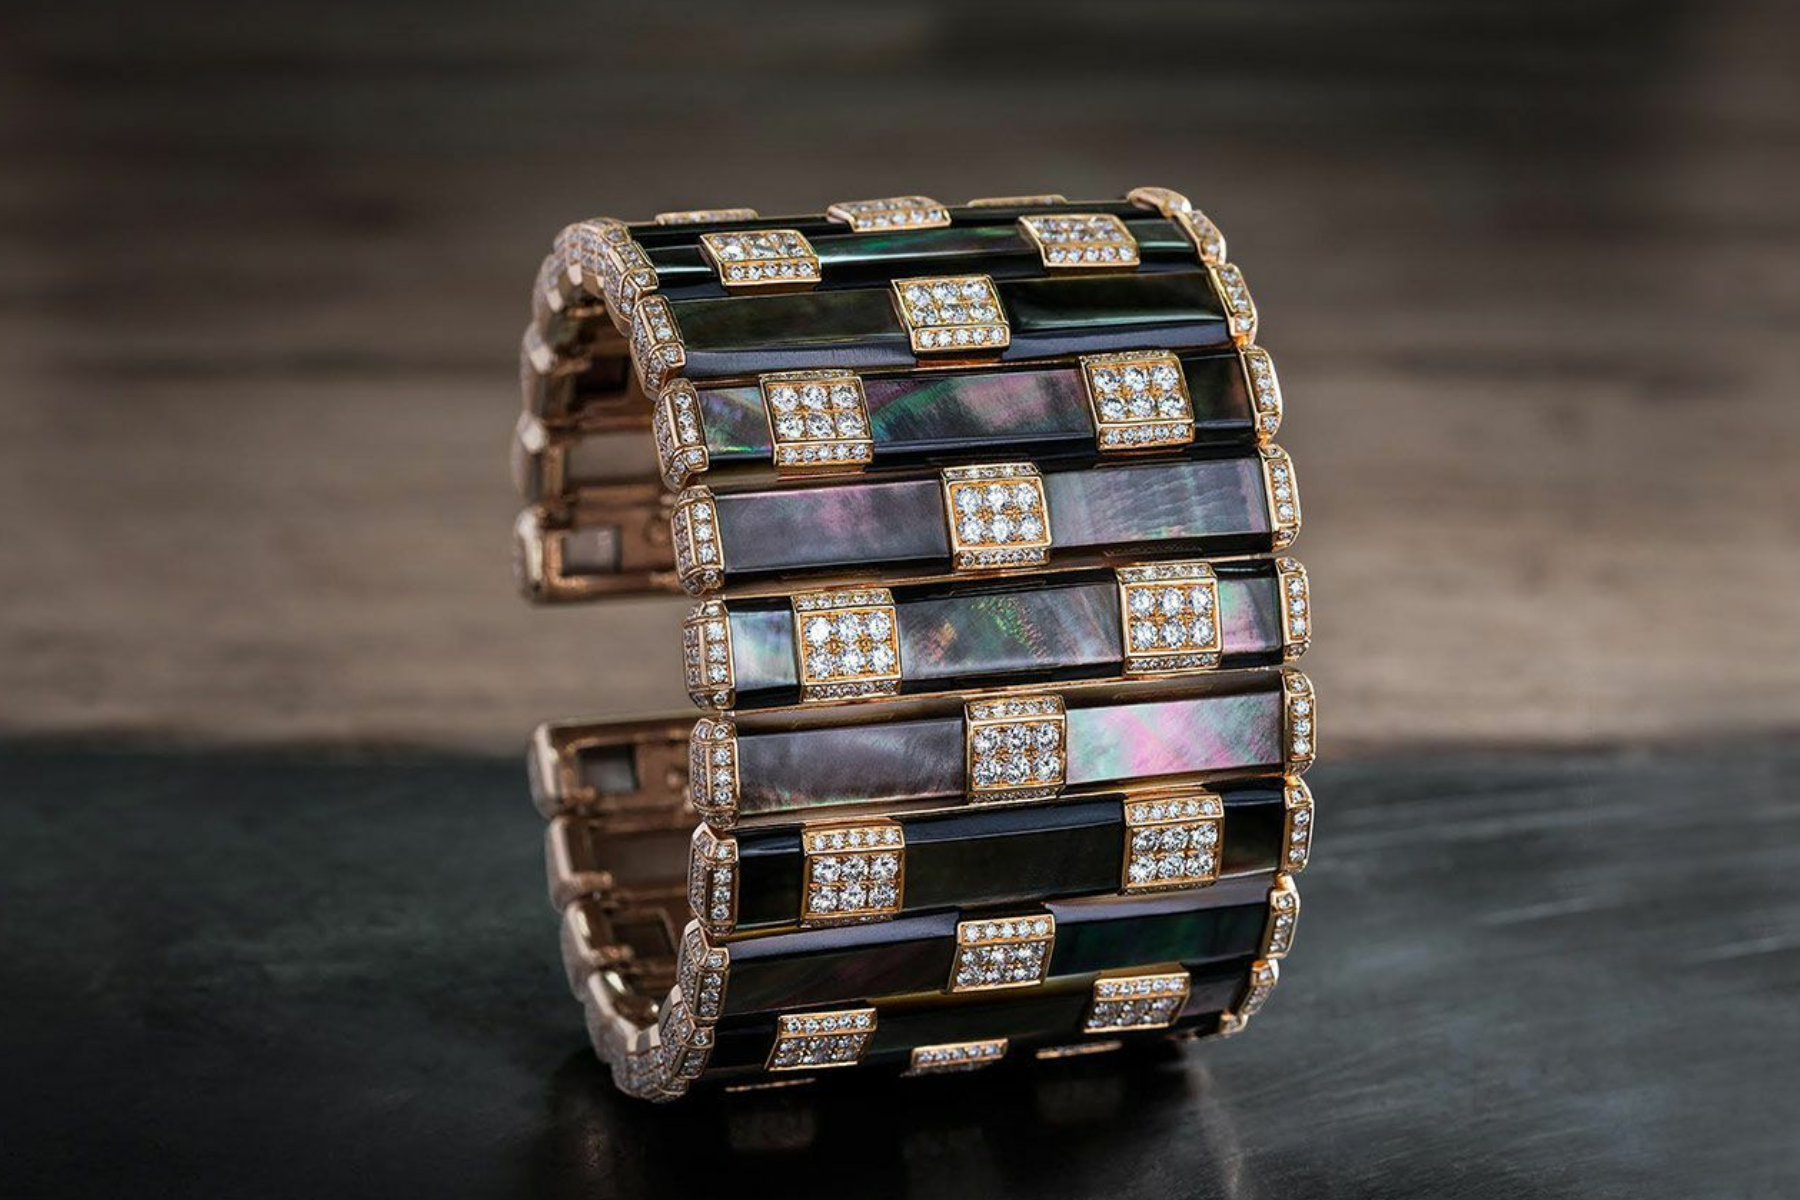 Cuff Bracelets Jewelry - Our Top Picks And Styling Tips